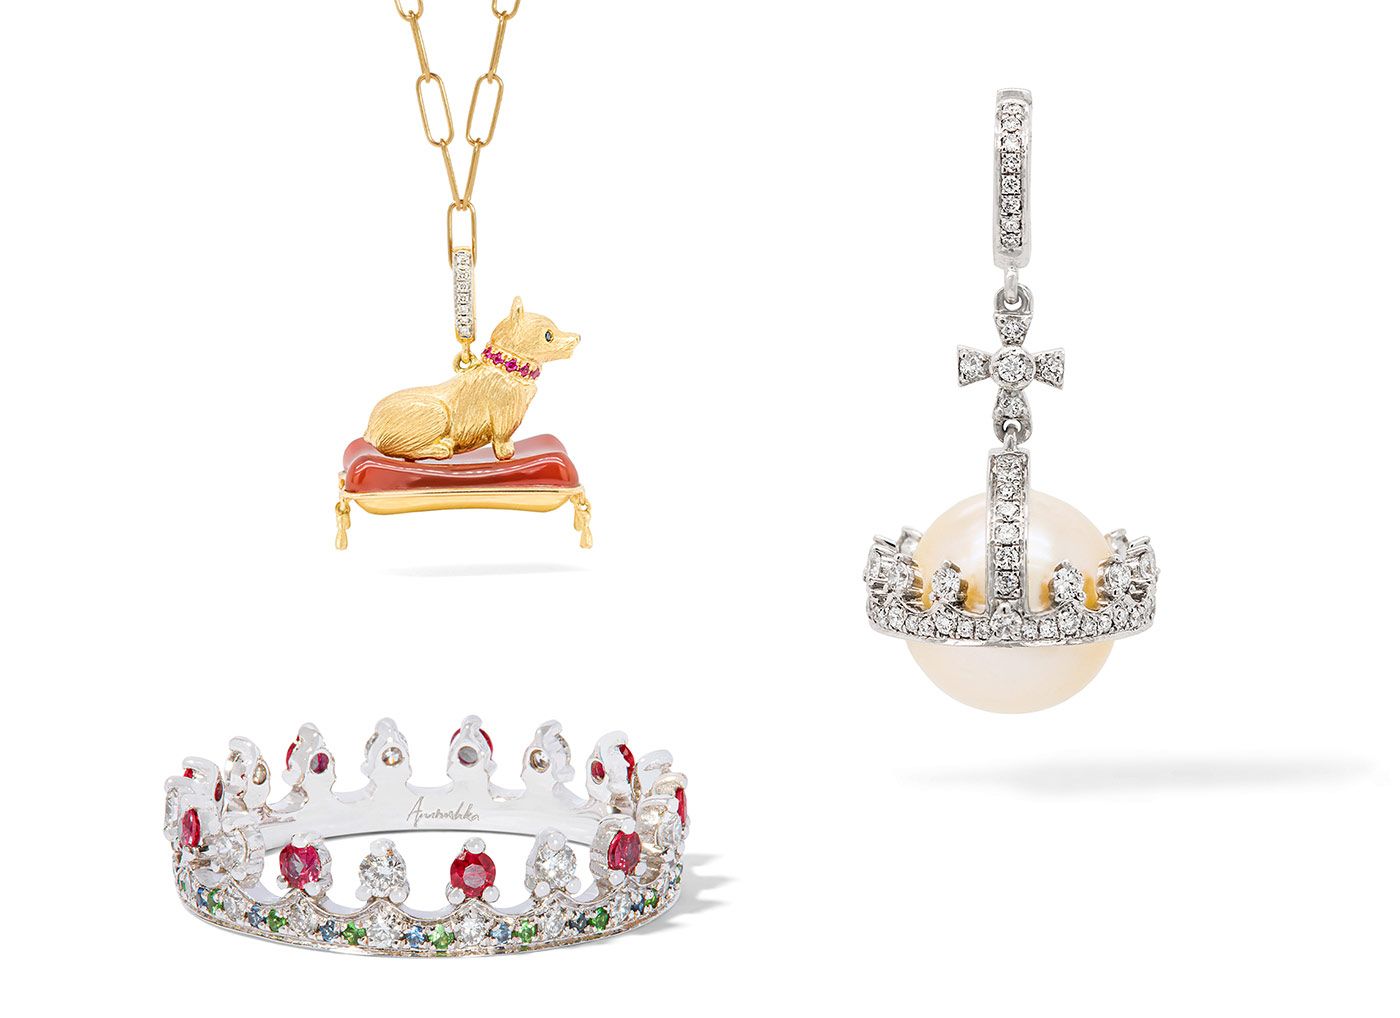 Annoushka Limited Edition Platinum Jubilee charms